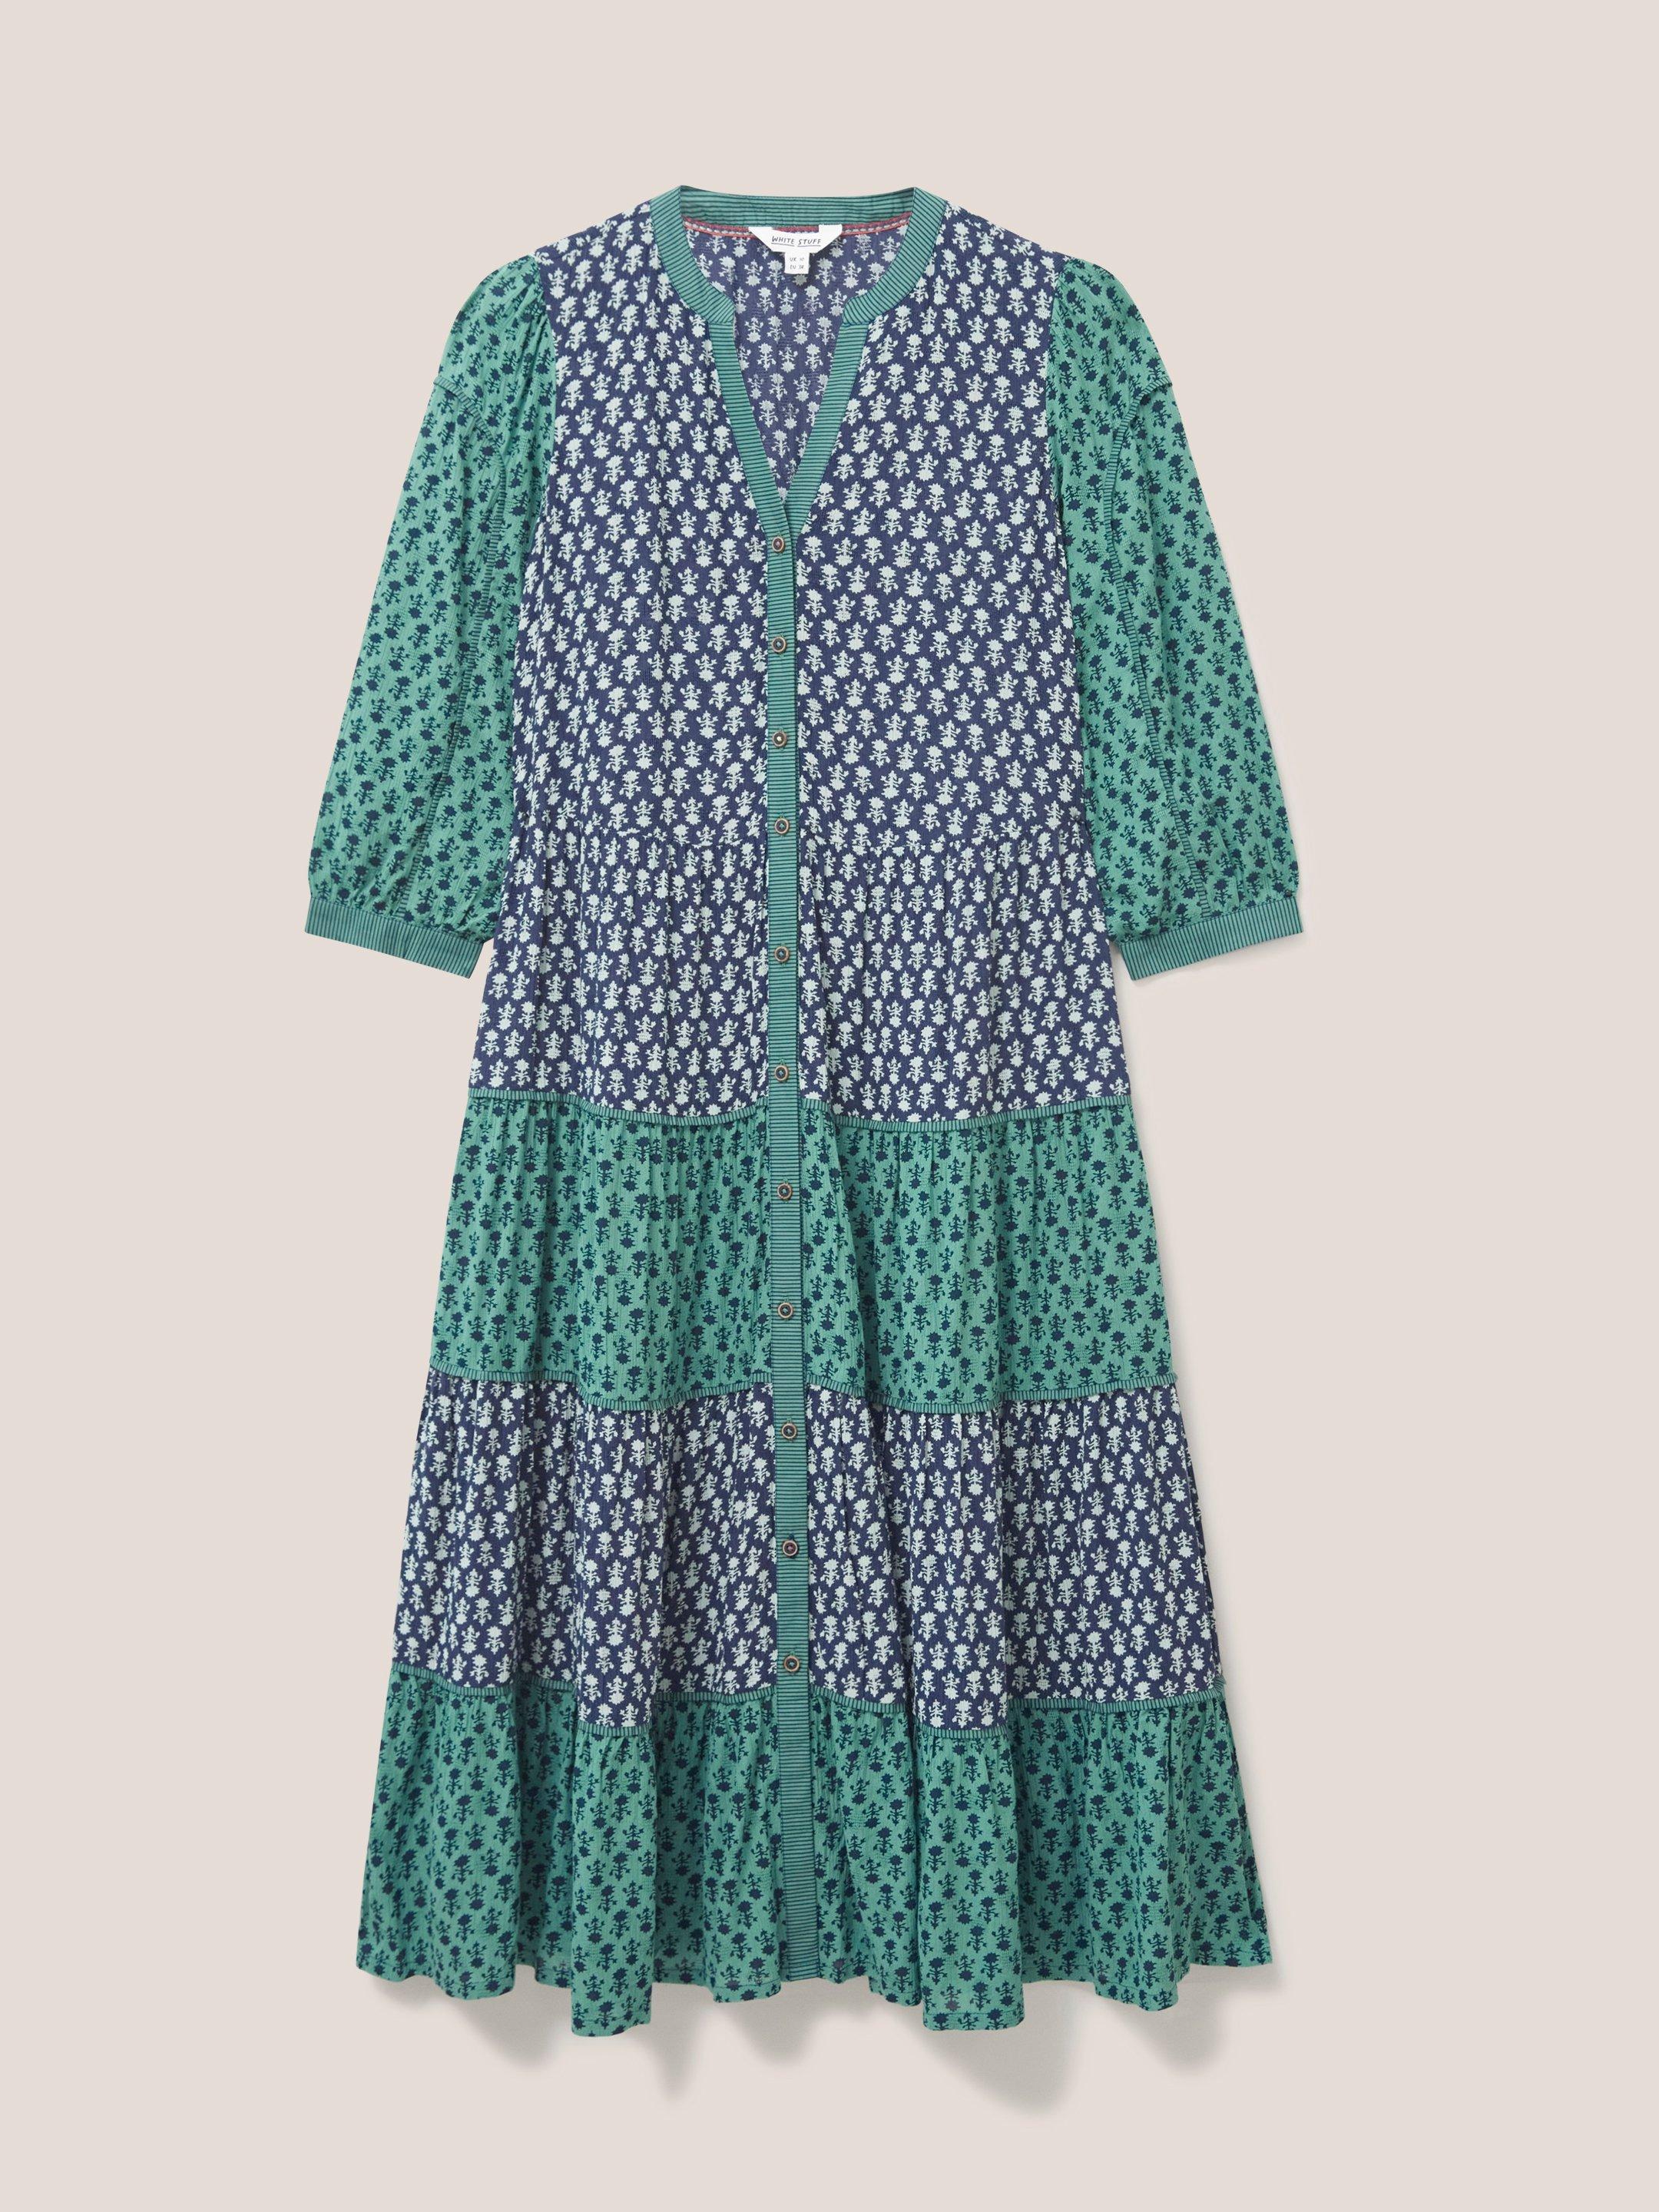 Mabel Mixed Print Dress in TEAL MLT - FLAT FRONT